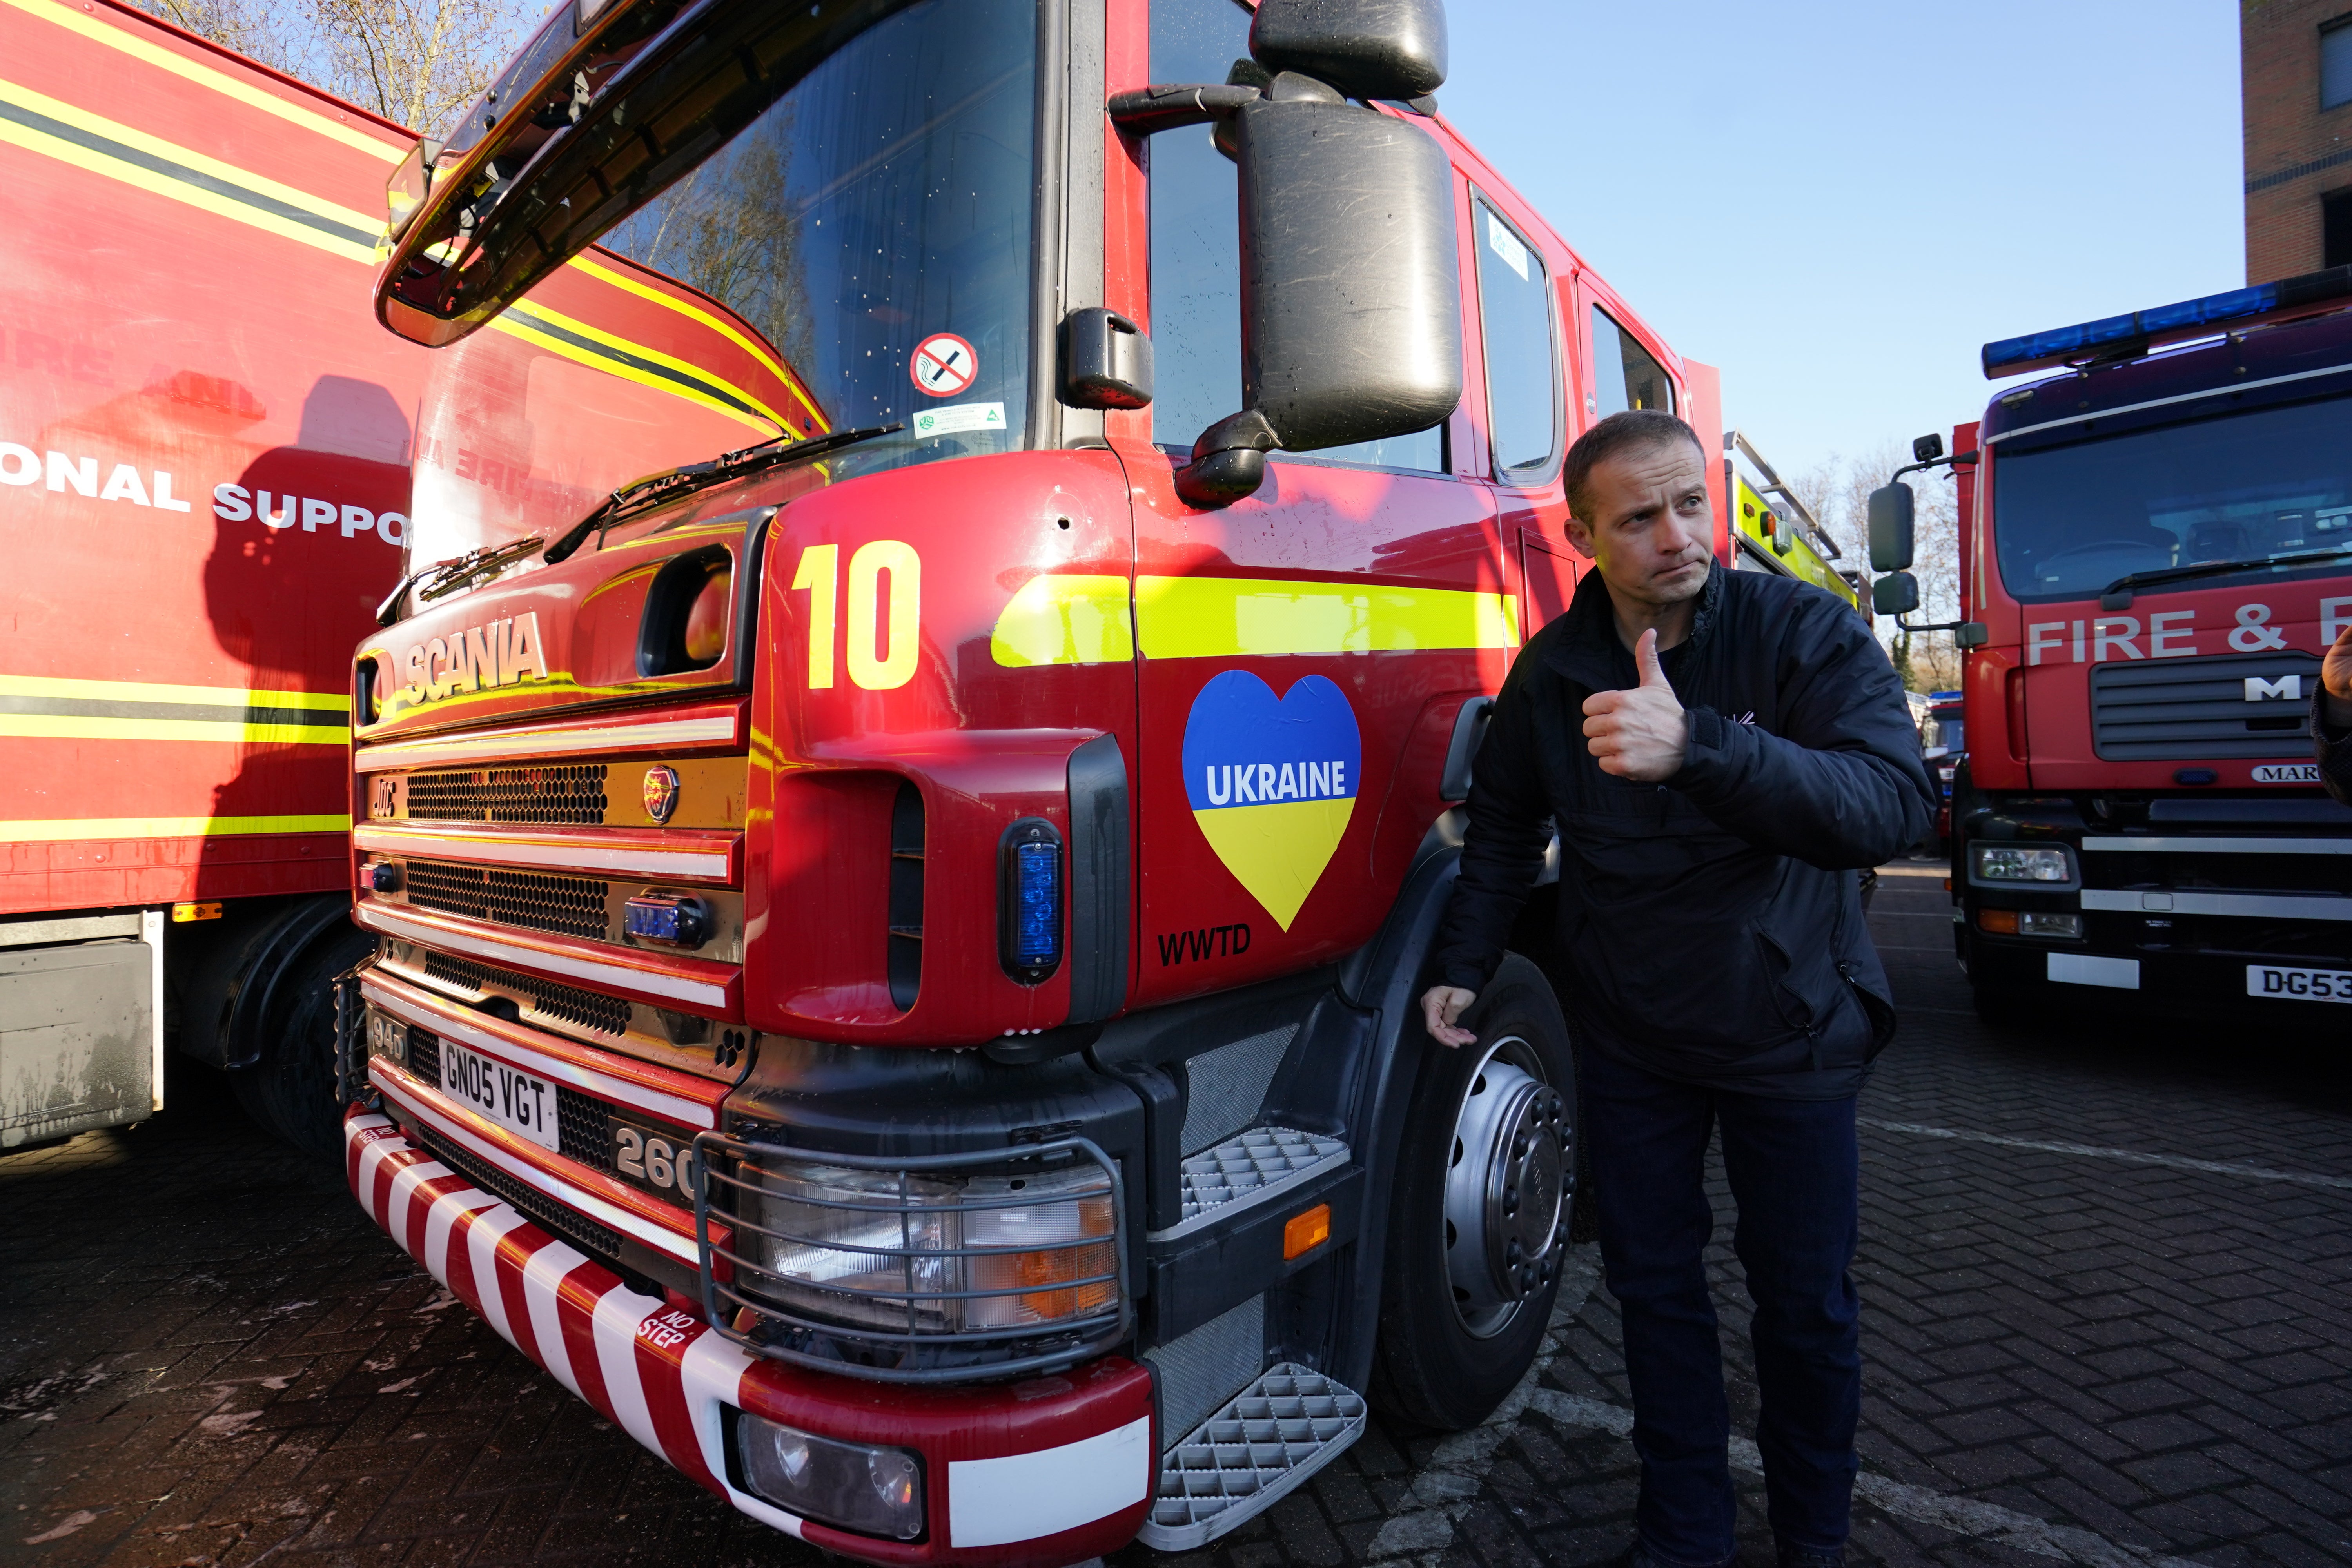 Donated kit includes generators, hoses and several fire trucks (Gareth Fuller/PA)